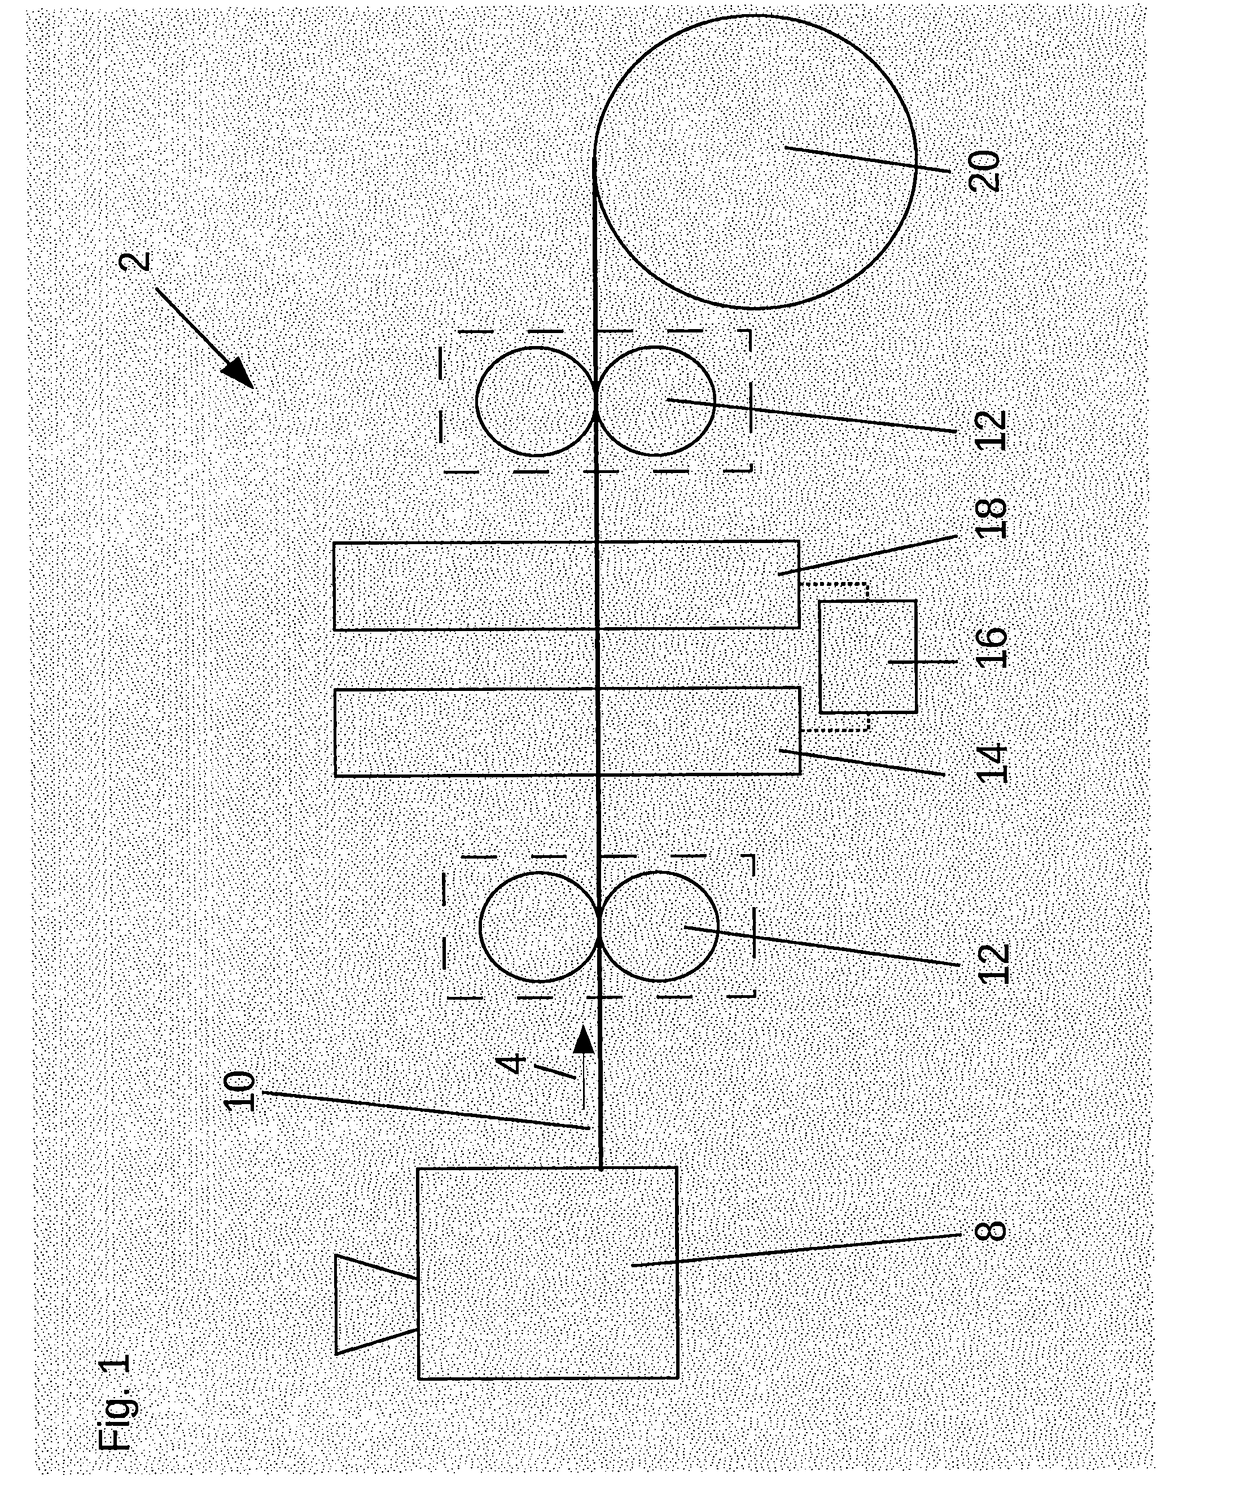 Device and method for producing a spring wire, device and method for making a spring wire, device and method for producing springs from a spring wire, and spring wire